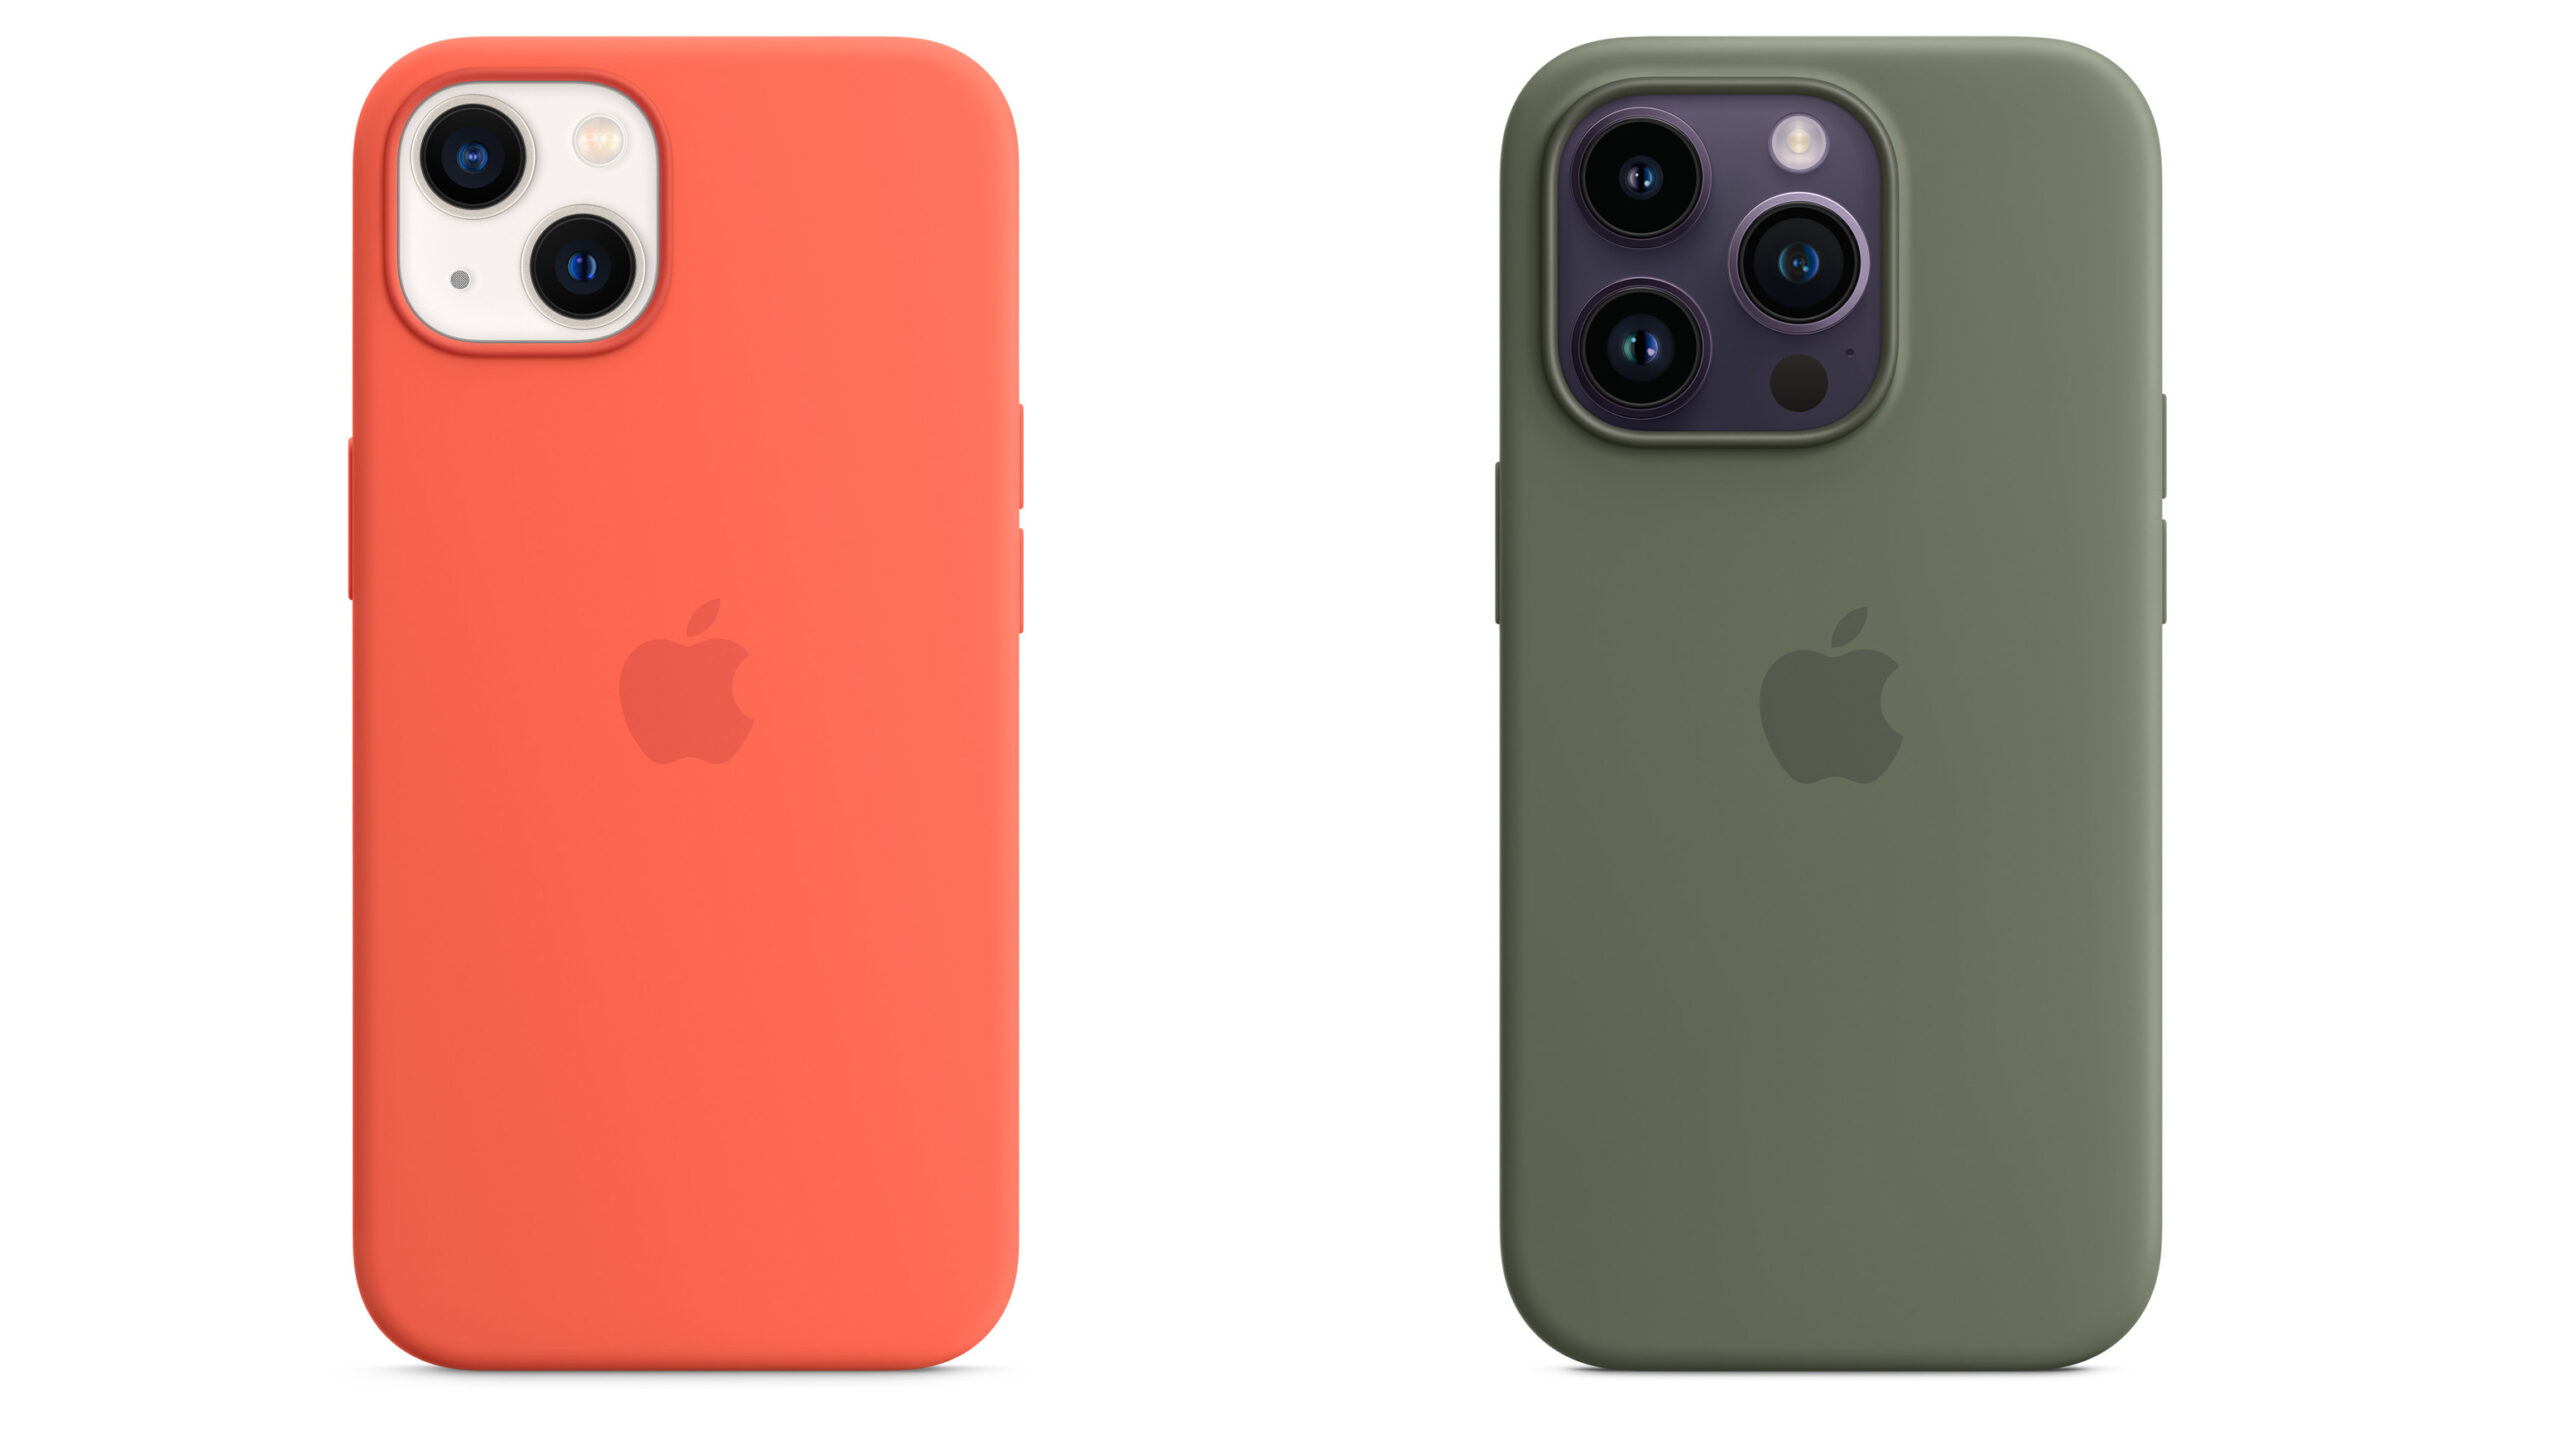 Apple’s silicone accessories could be discontinued alongside iPhone 15 launch